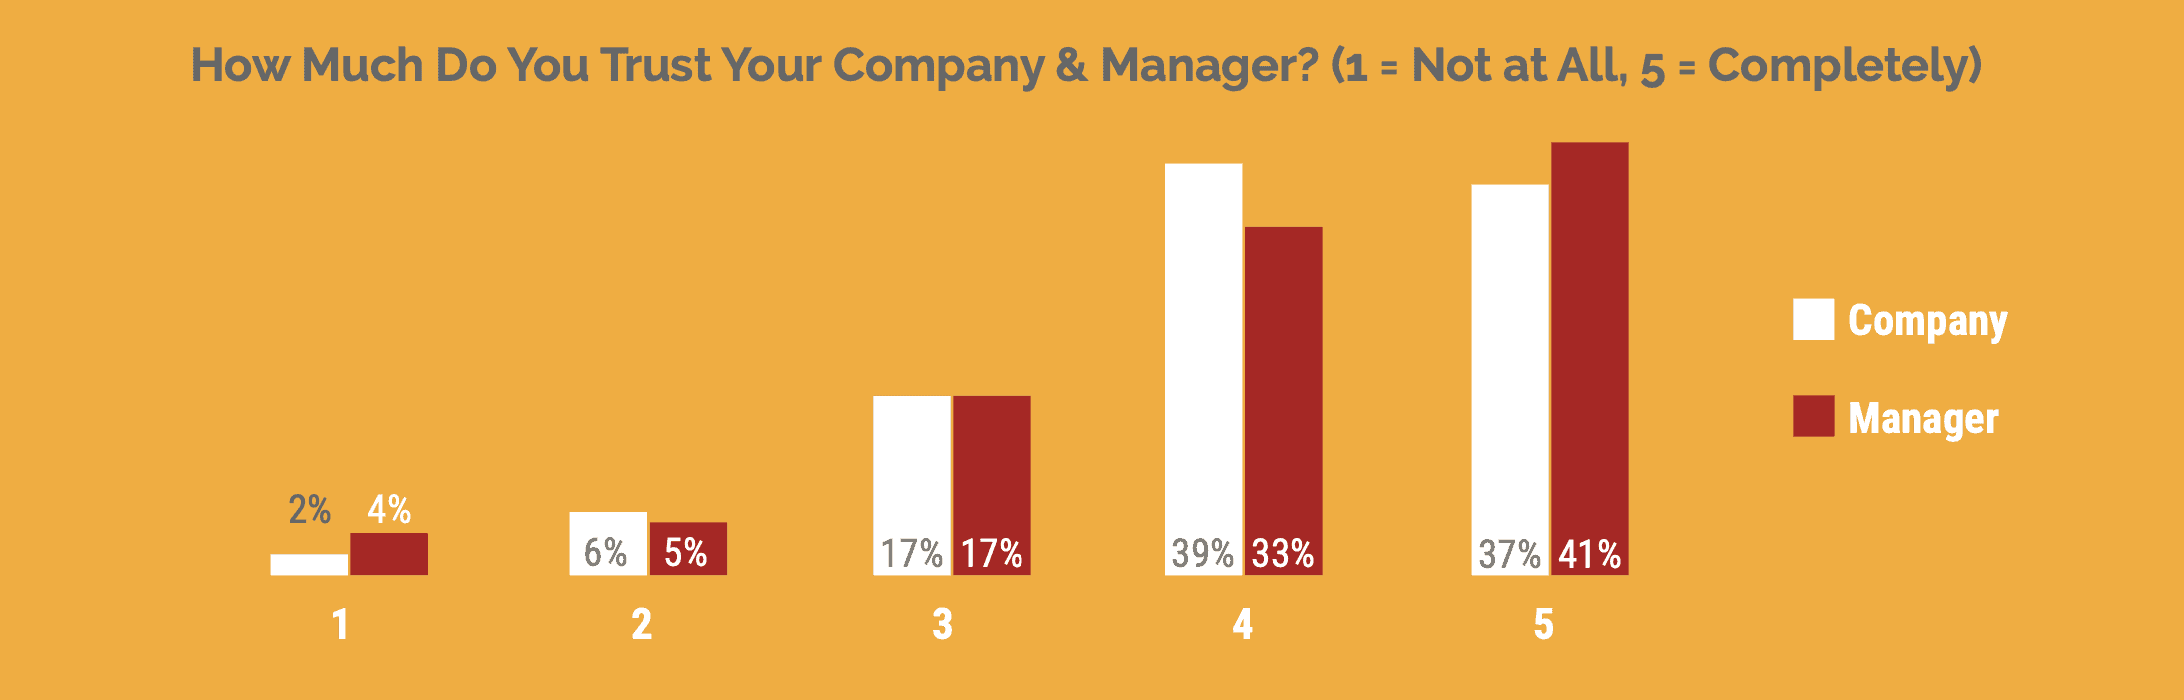 levels of trust in one's company versus their direct manager